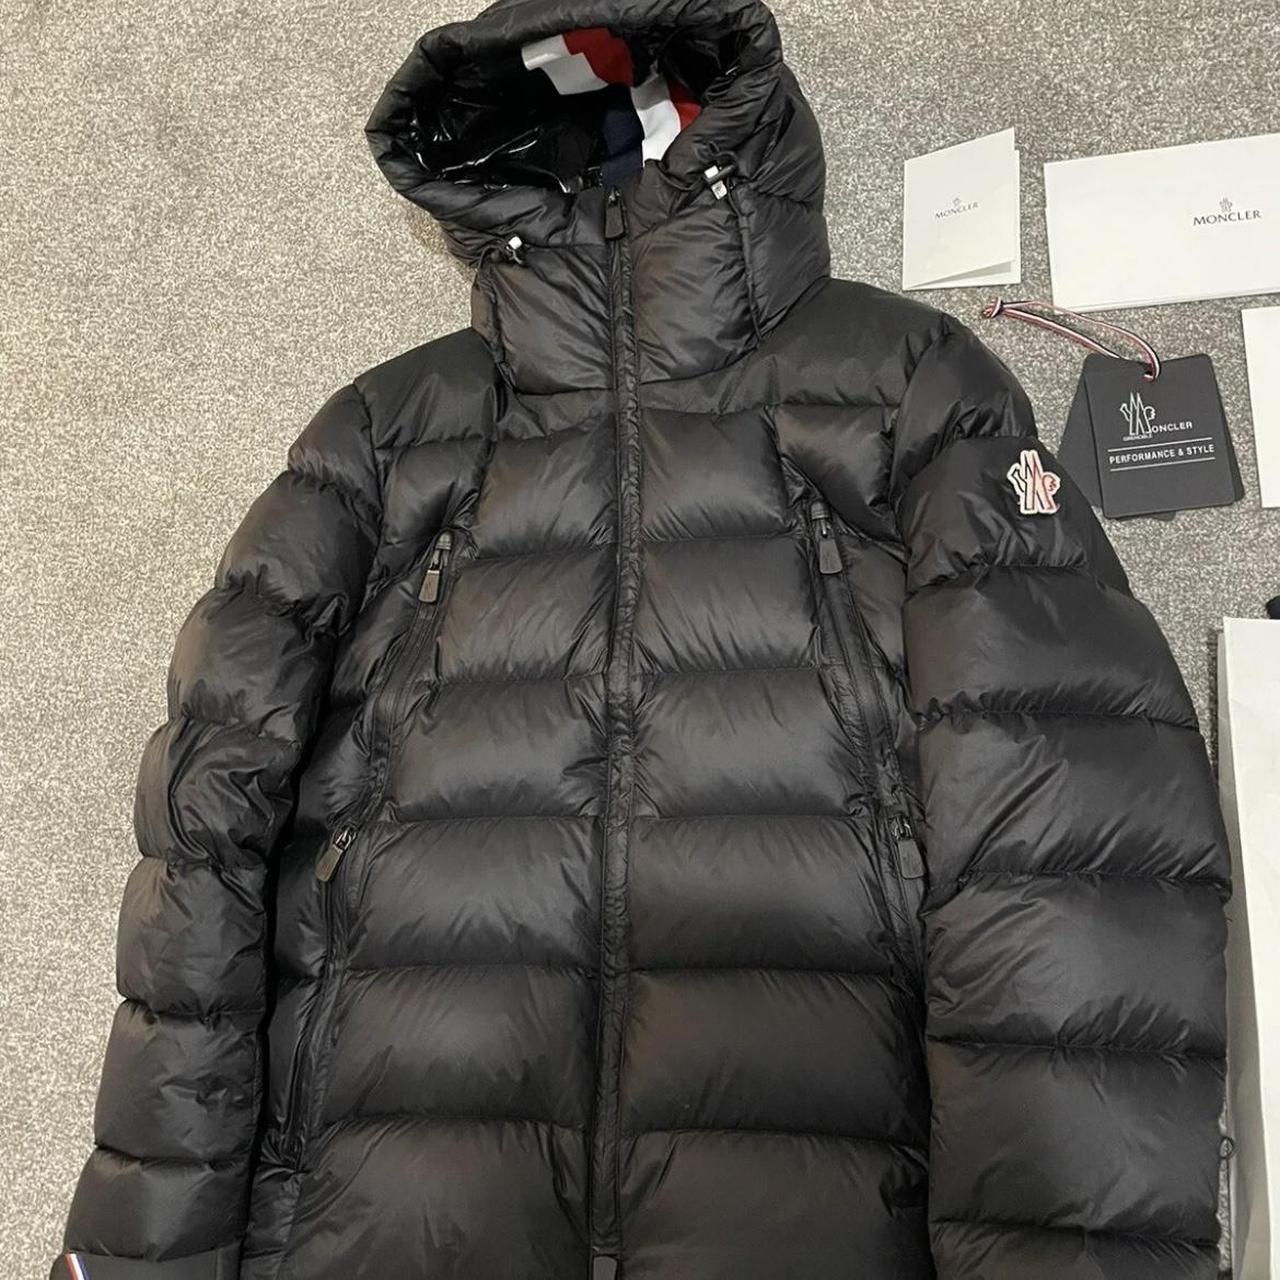 Moncler Grenoble The coat is a size 3 would fit a... - Depop